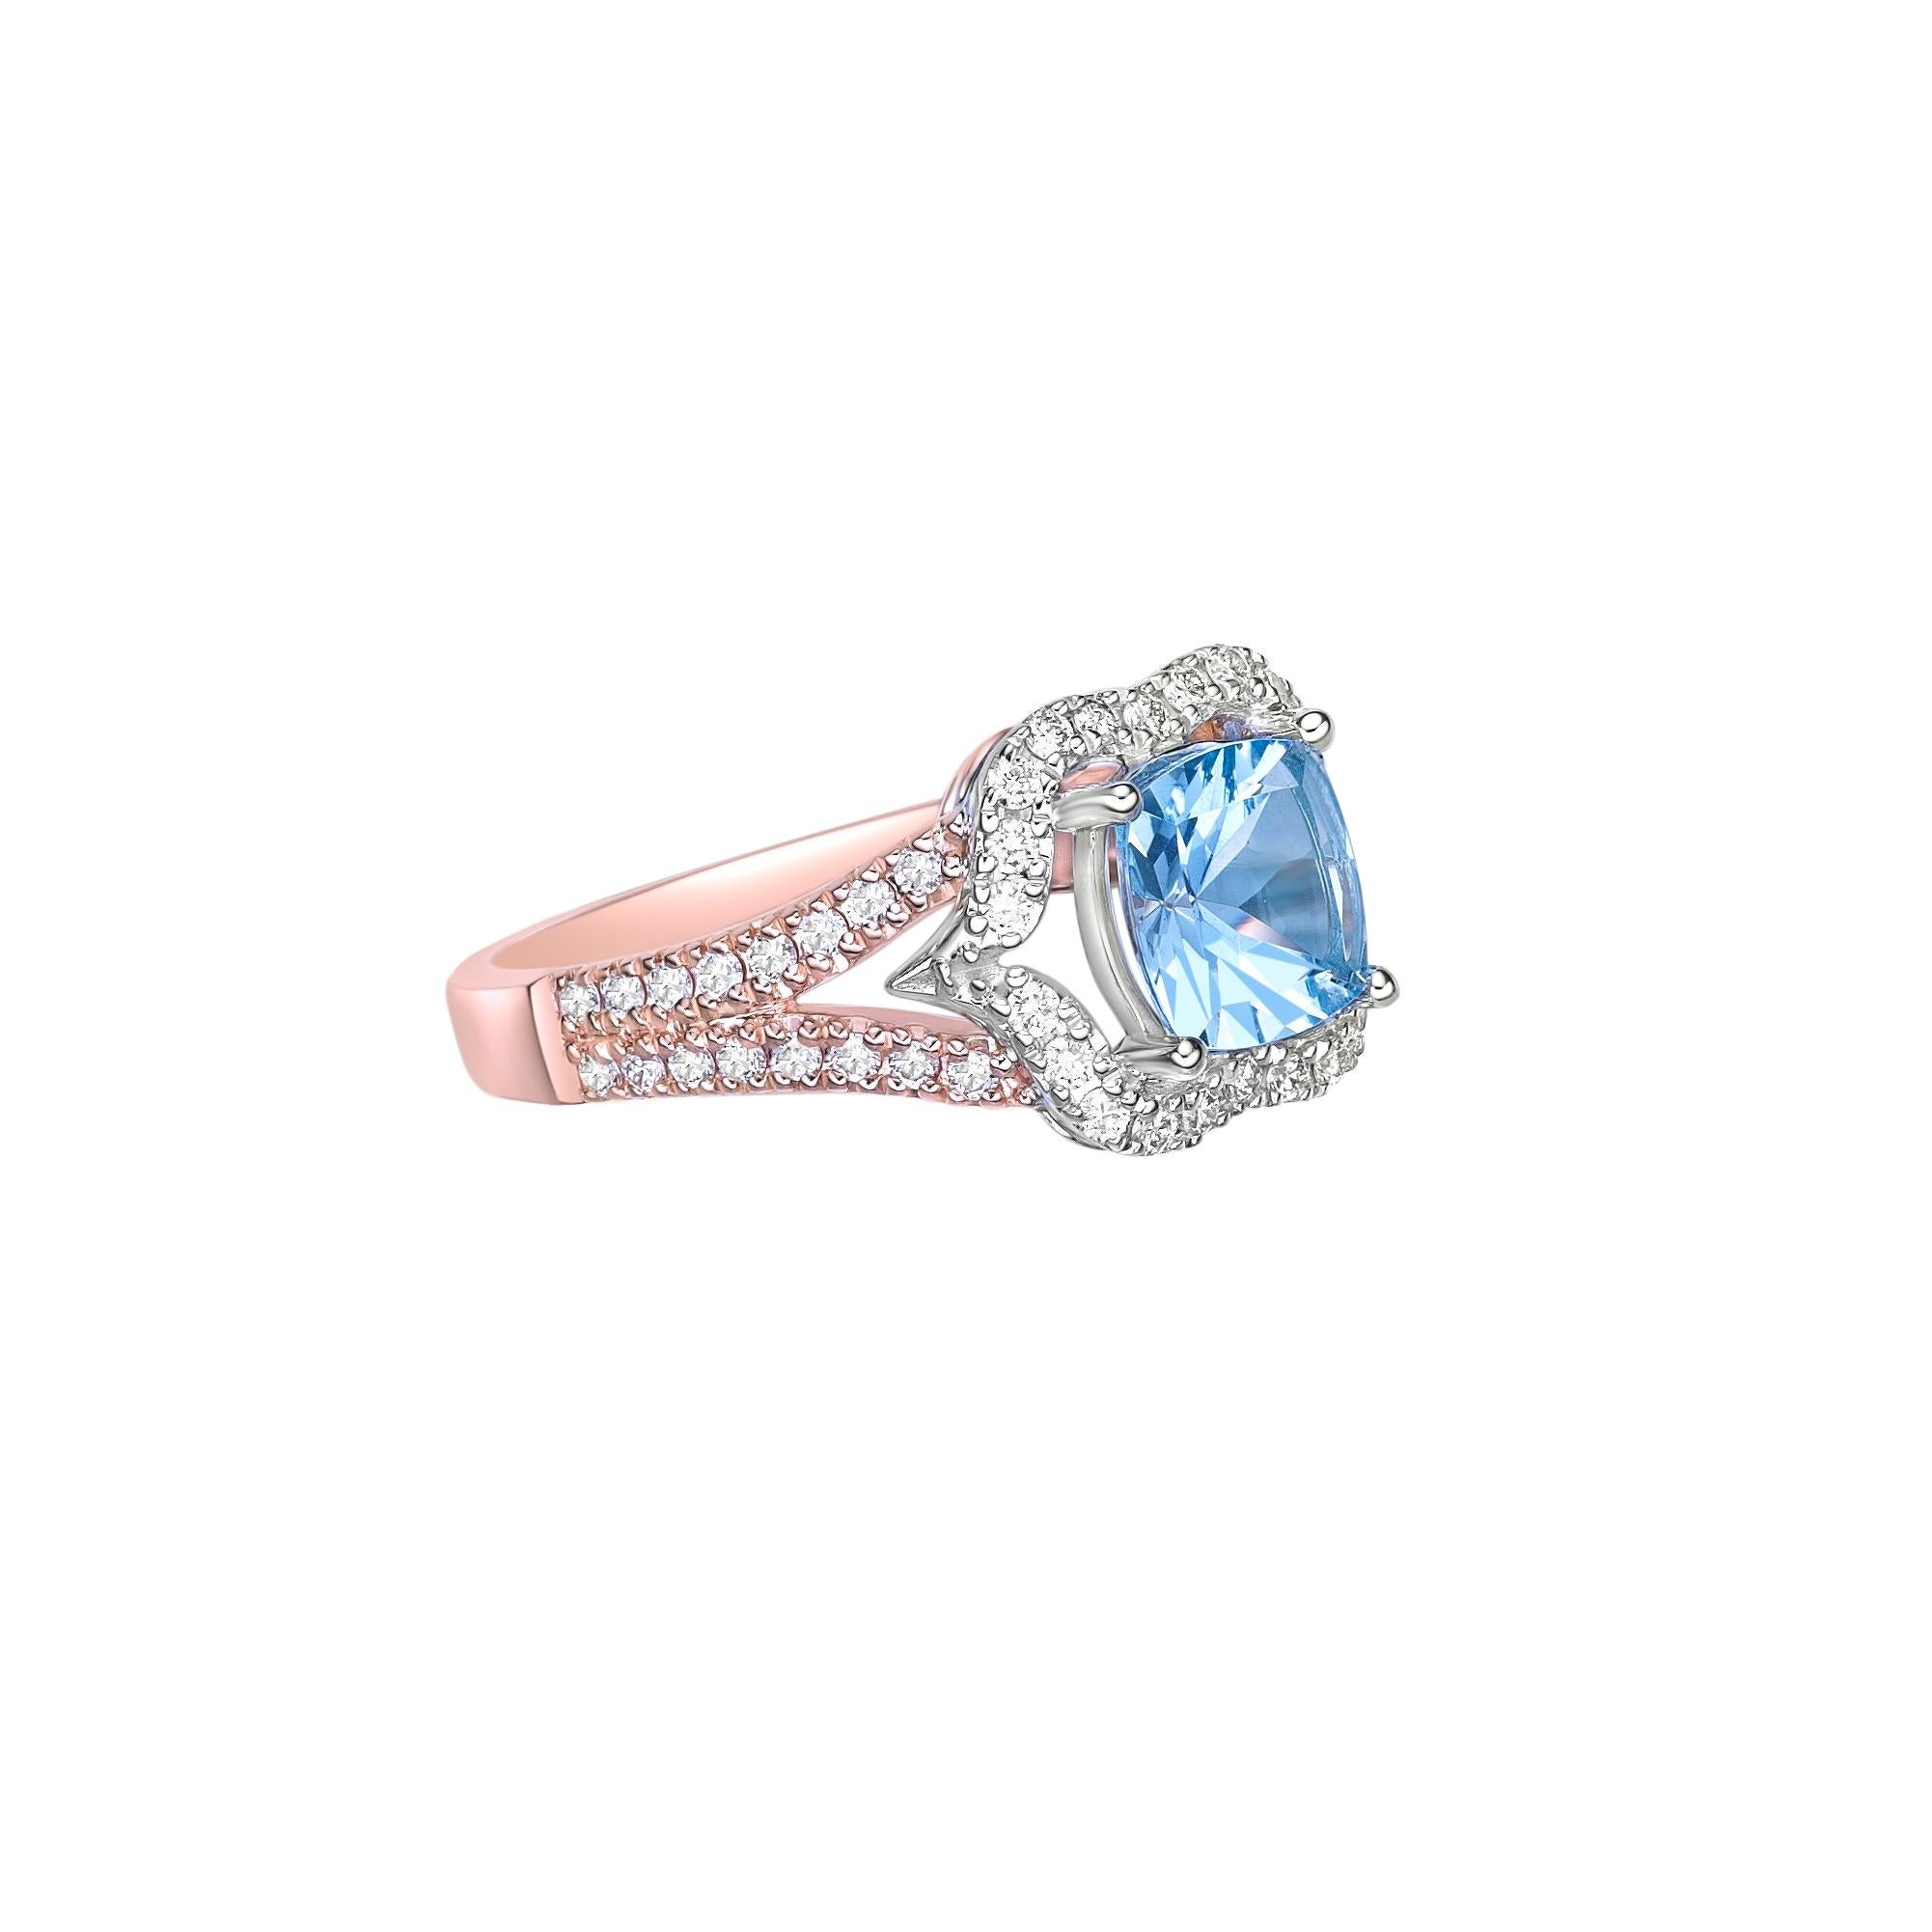 This collection features an array of Aquamarines with an icy blue hue that is as cool as it gets! Accented with Diamonds this ring is made in white gold and present a classic yet elegant look.
  
Aquamarine Fancy Ring in 18Karat White Rose Gold with